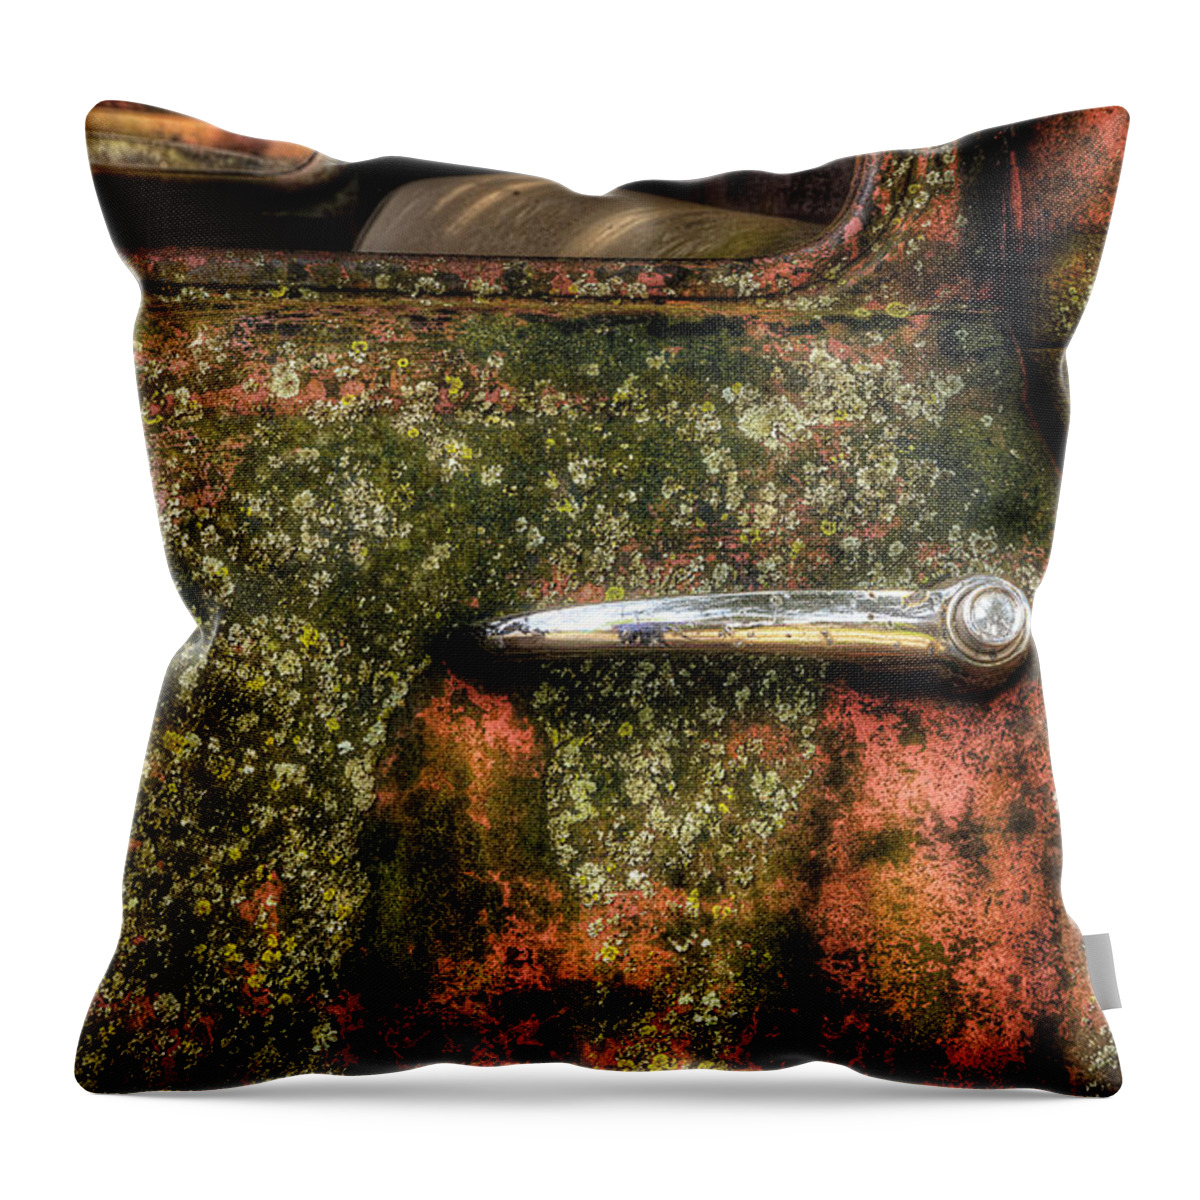 Truck Throw Pillow featuring the photograph A Handle In Time by Mike Eingle